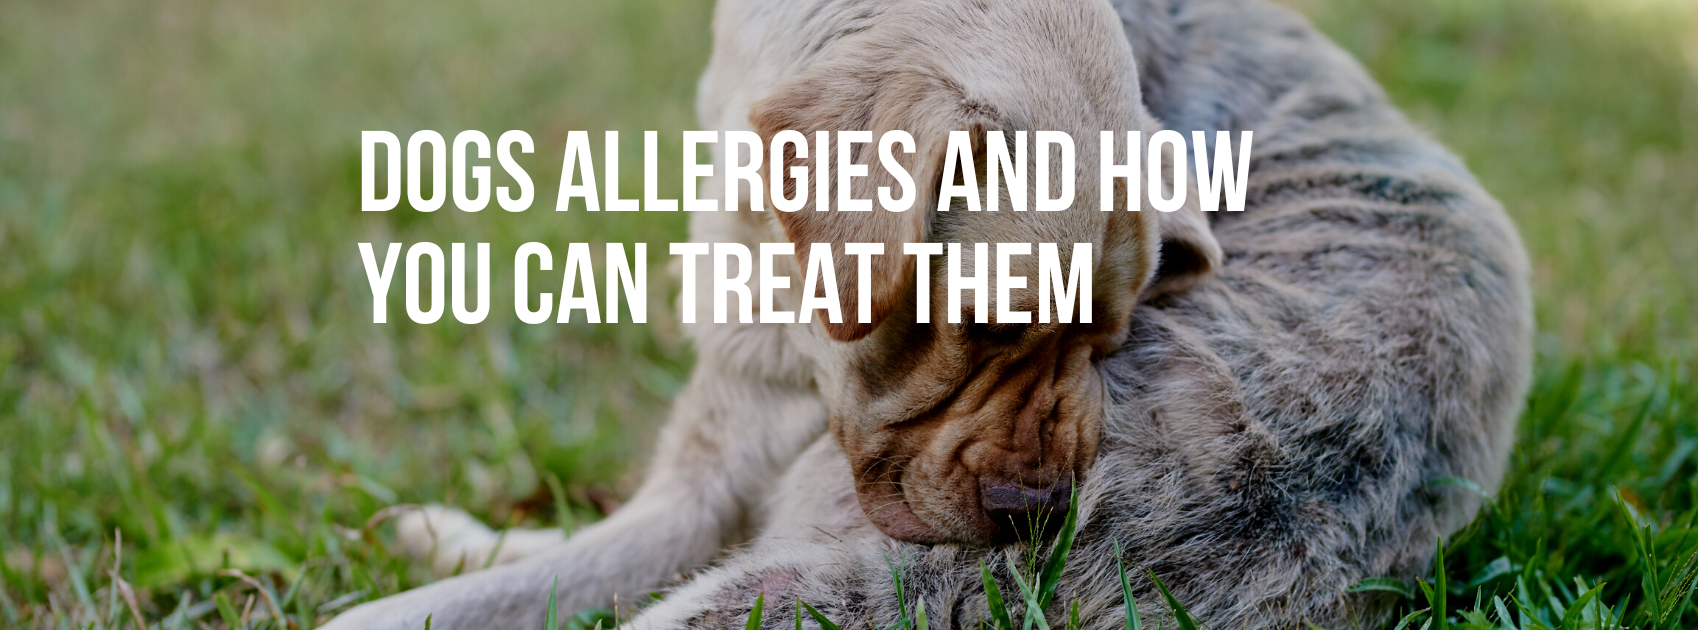 Dogs Allergies and How You Can Treat Them